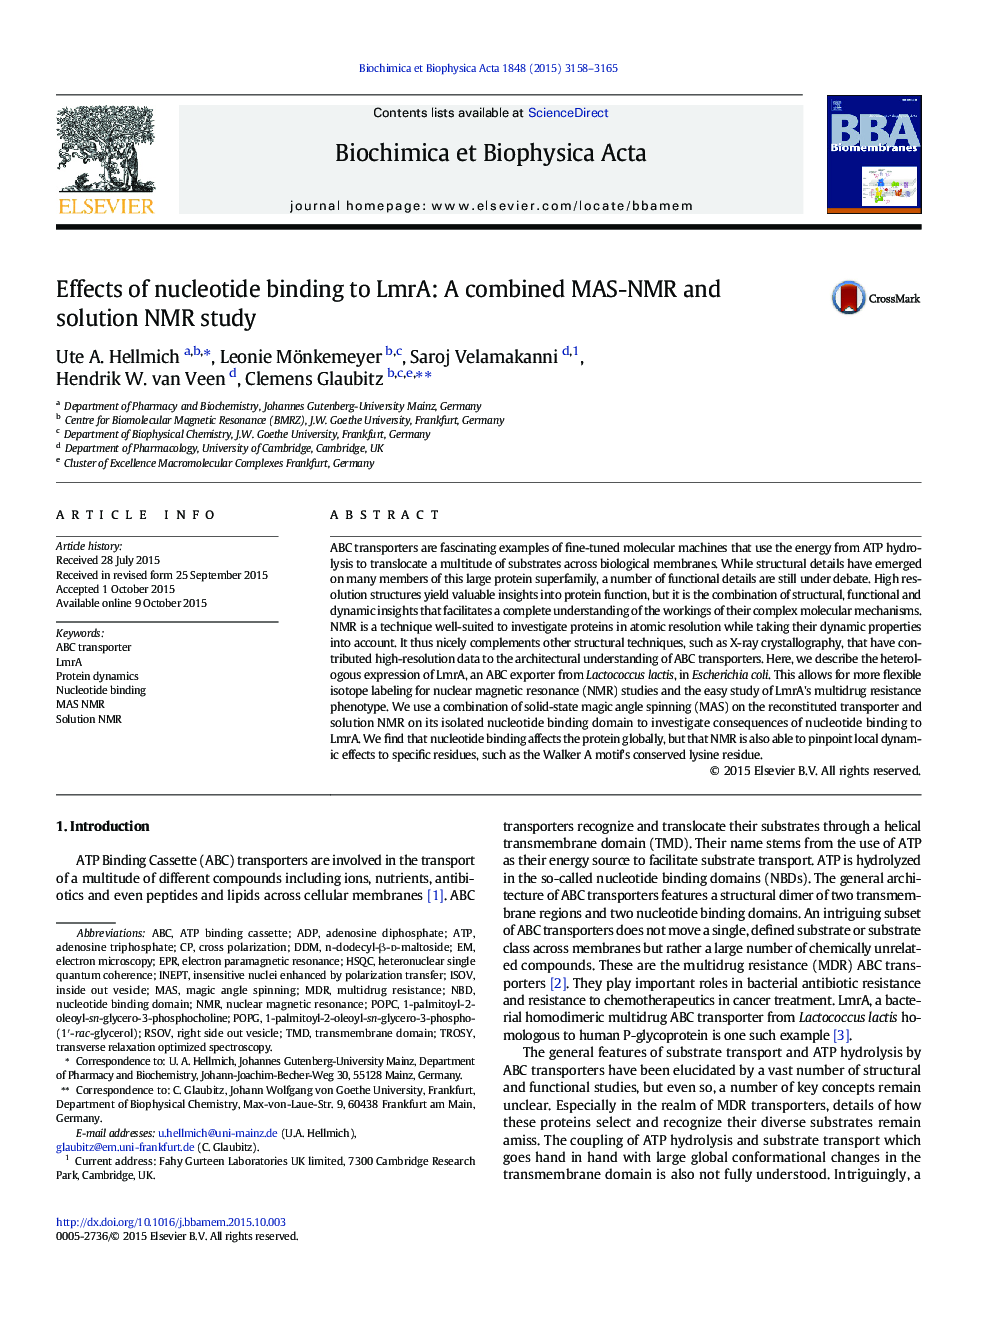 Effects of nucleotide binding to LmrA: A combined MAS-NMR and solution NMR study